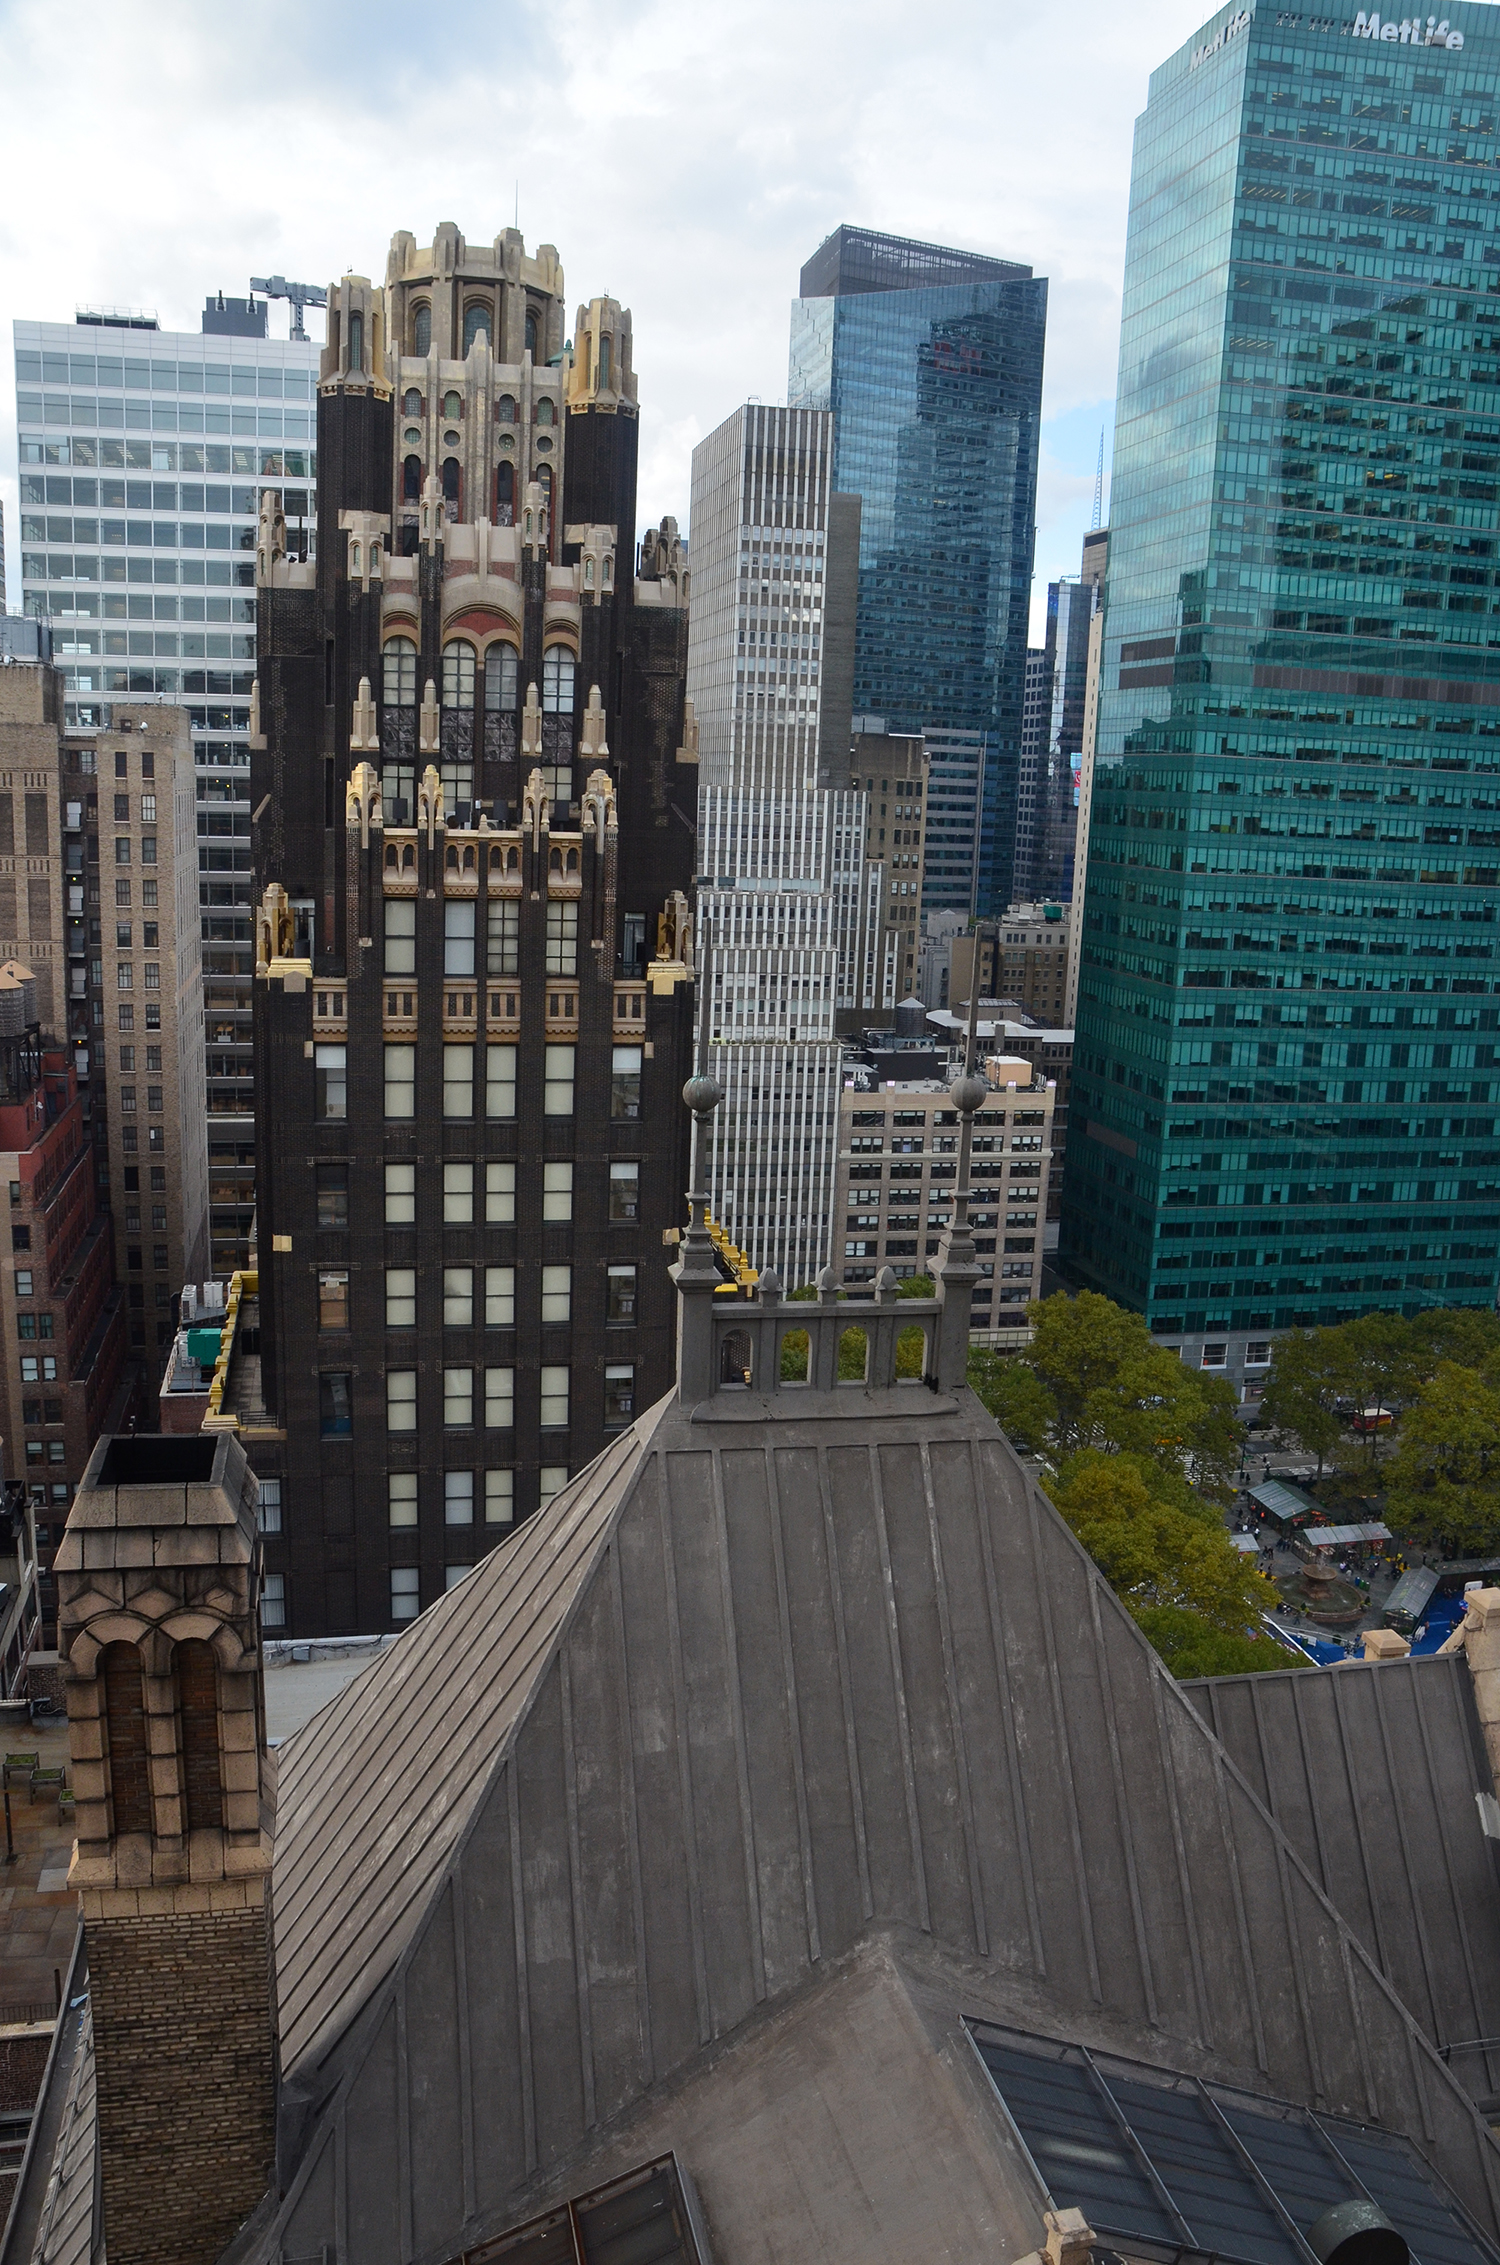 The Bryant Park Hotel and 24 West 40th Street as seen from The Bryant